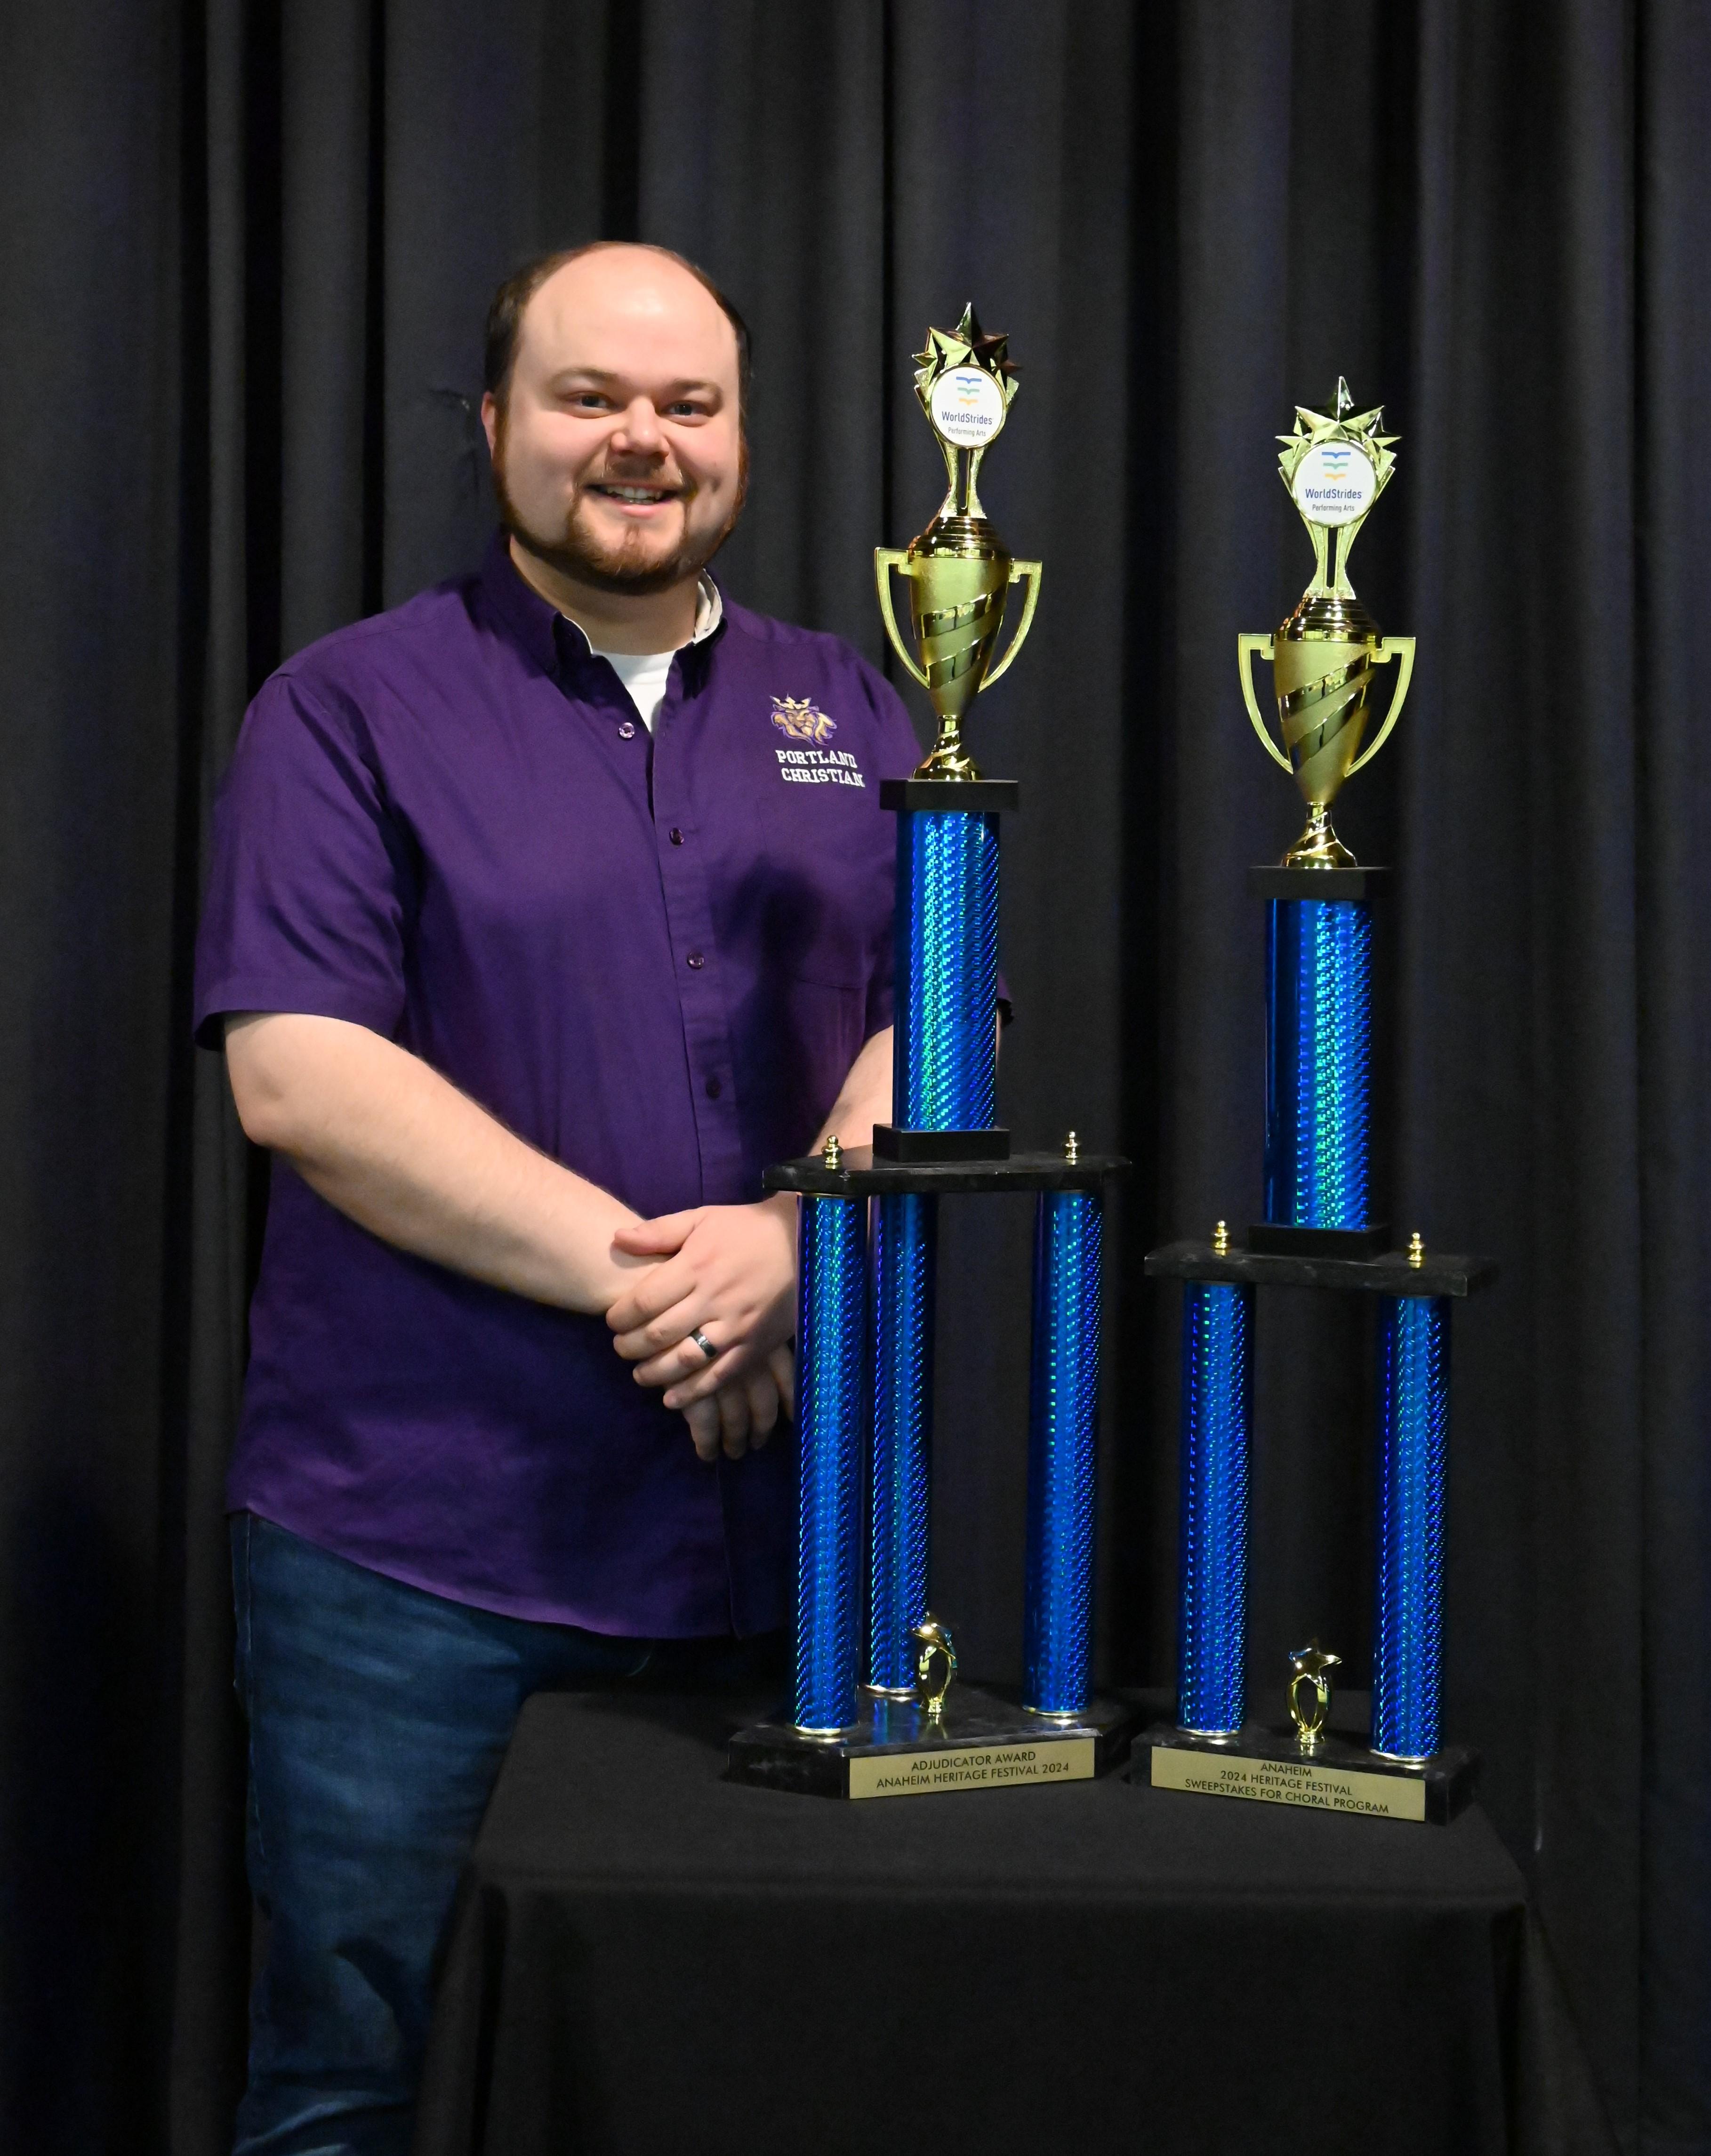 Joseph Ostrand with the Choral Sweepstakes Award